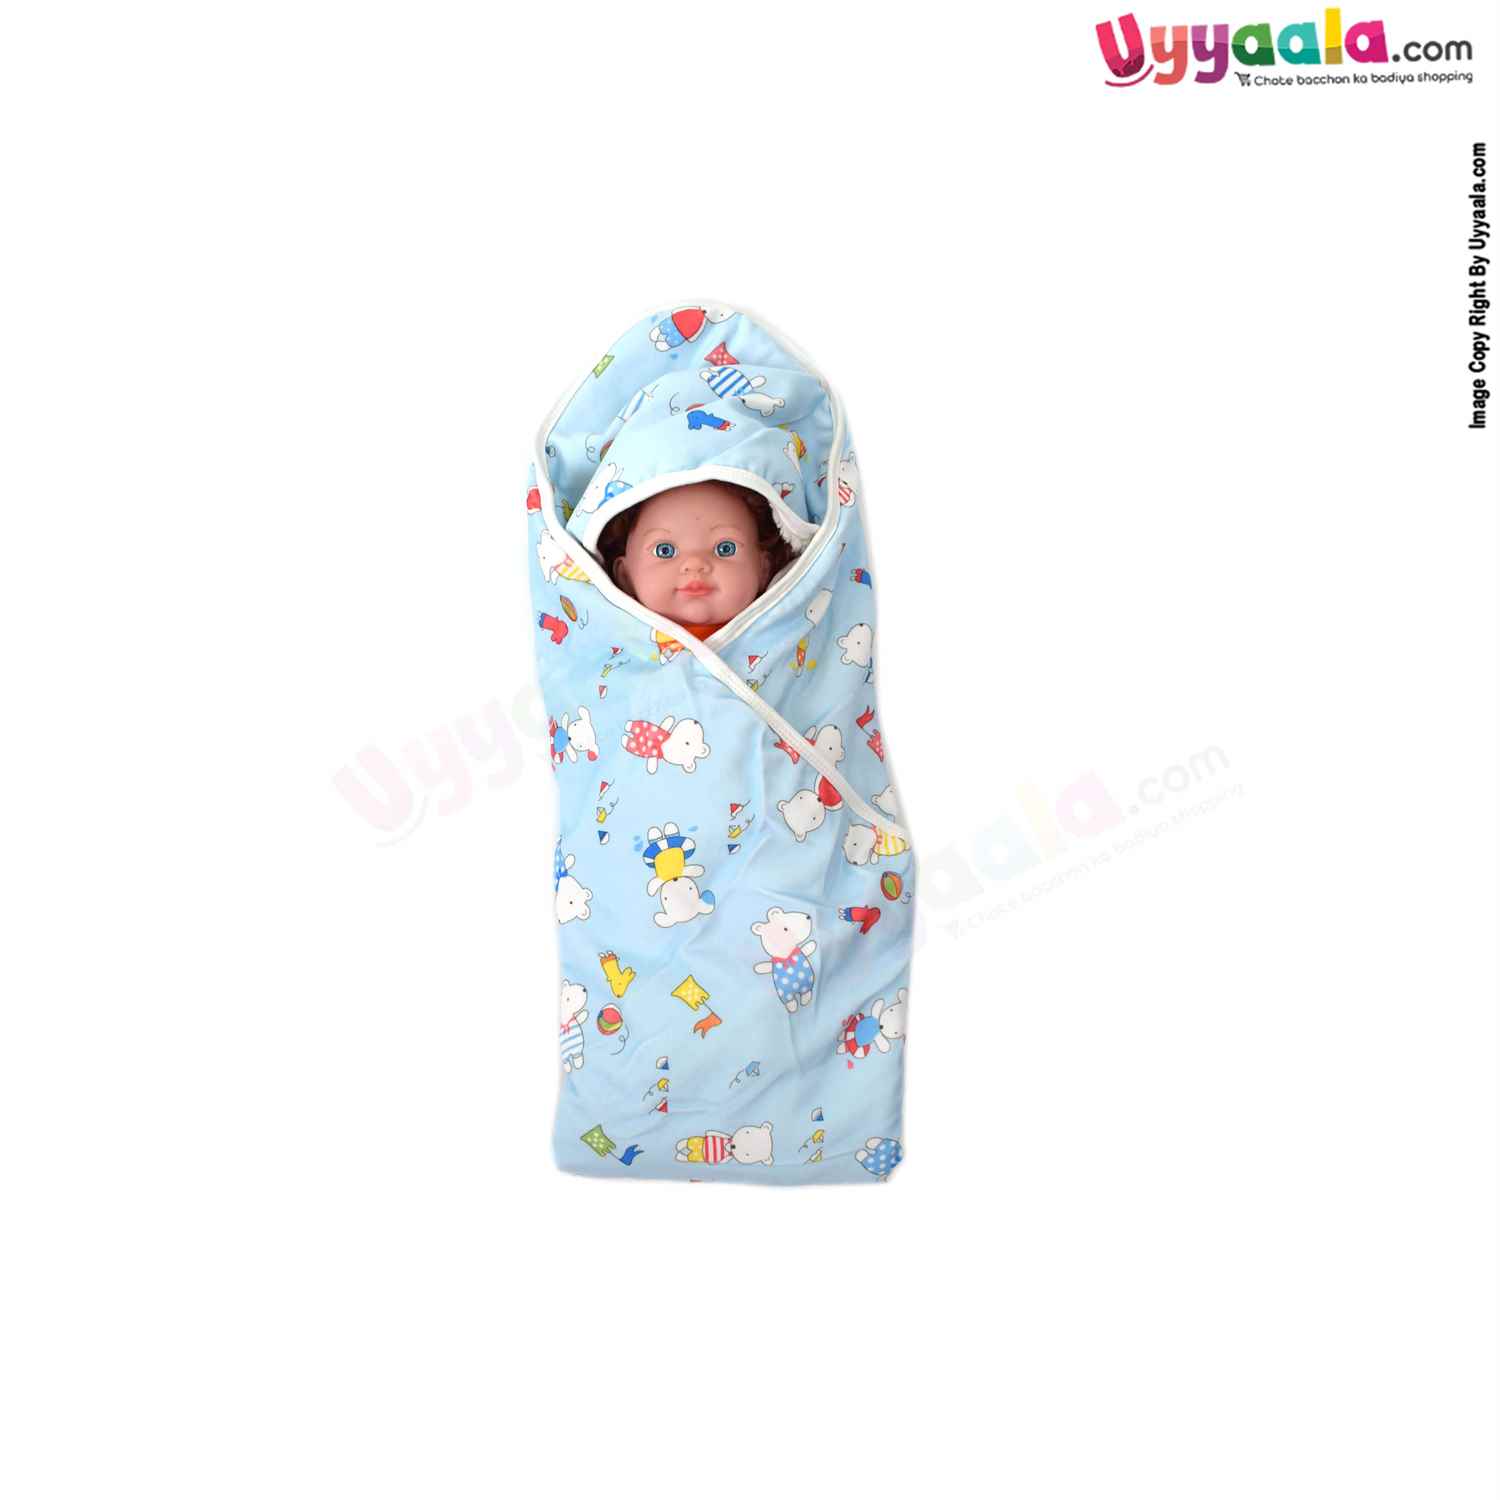 Double Layered (2 Ply) Hooded Blanket One Side Fur & Another Side Velvet with Animals Print for Babies 0-24m Age, Size(74*74cm)- Light Blue